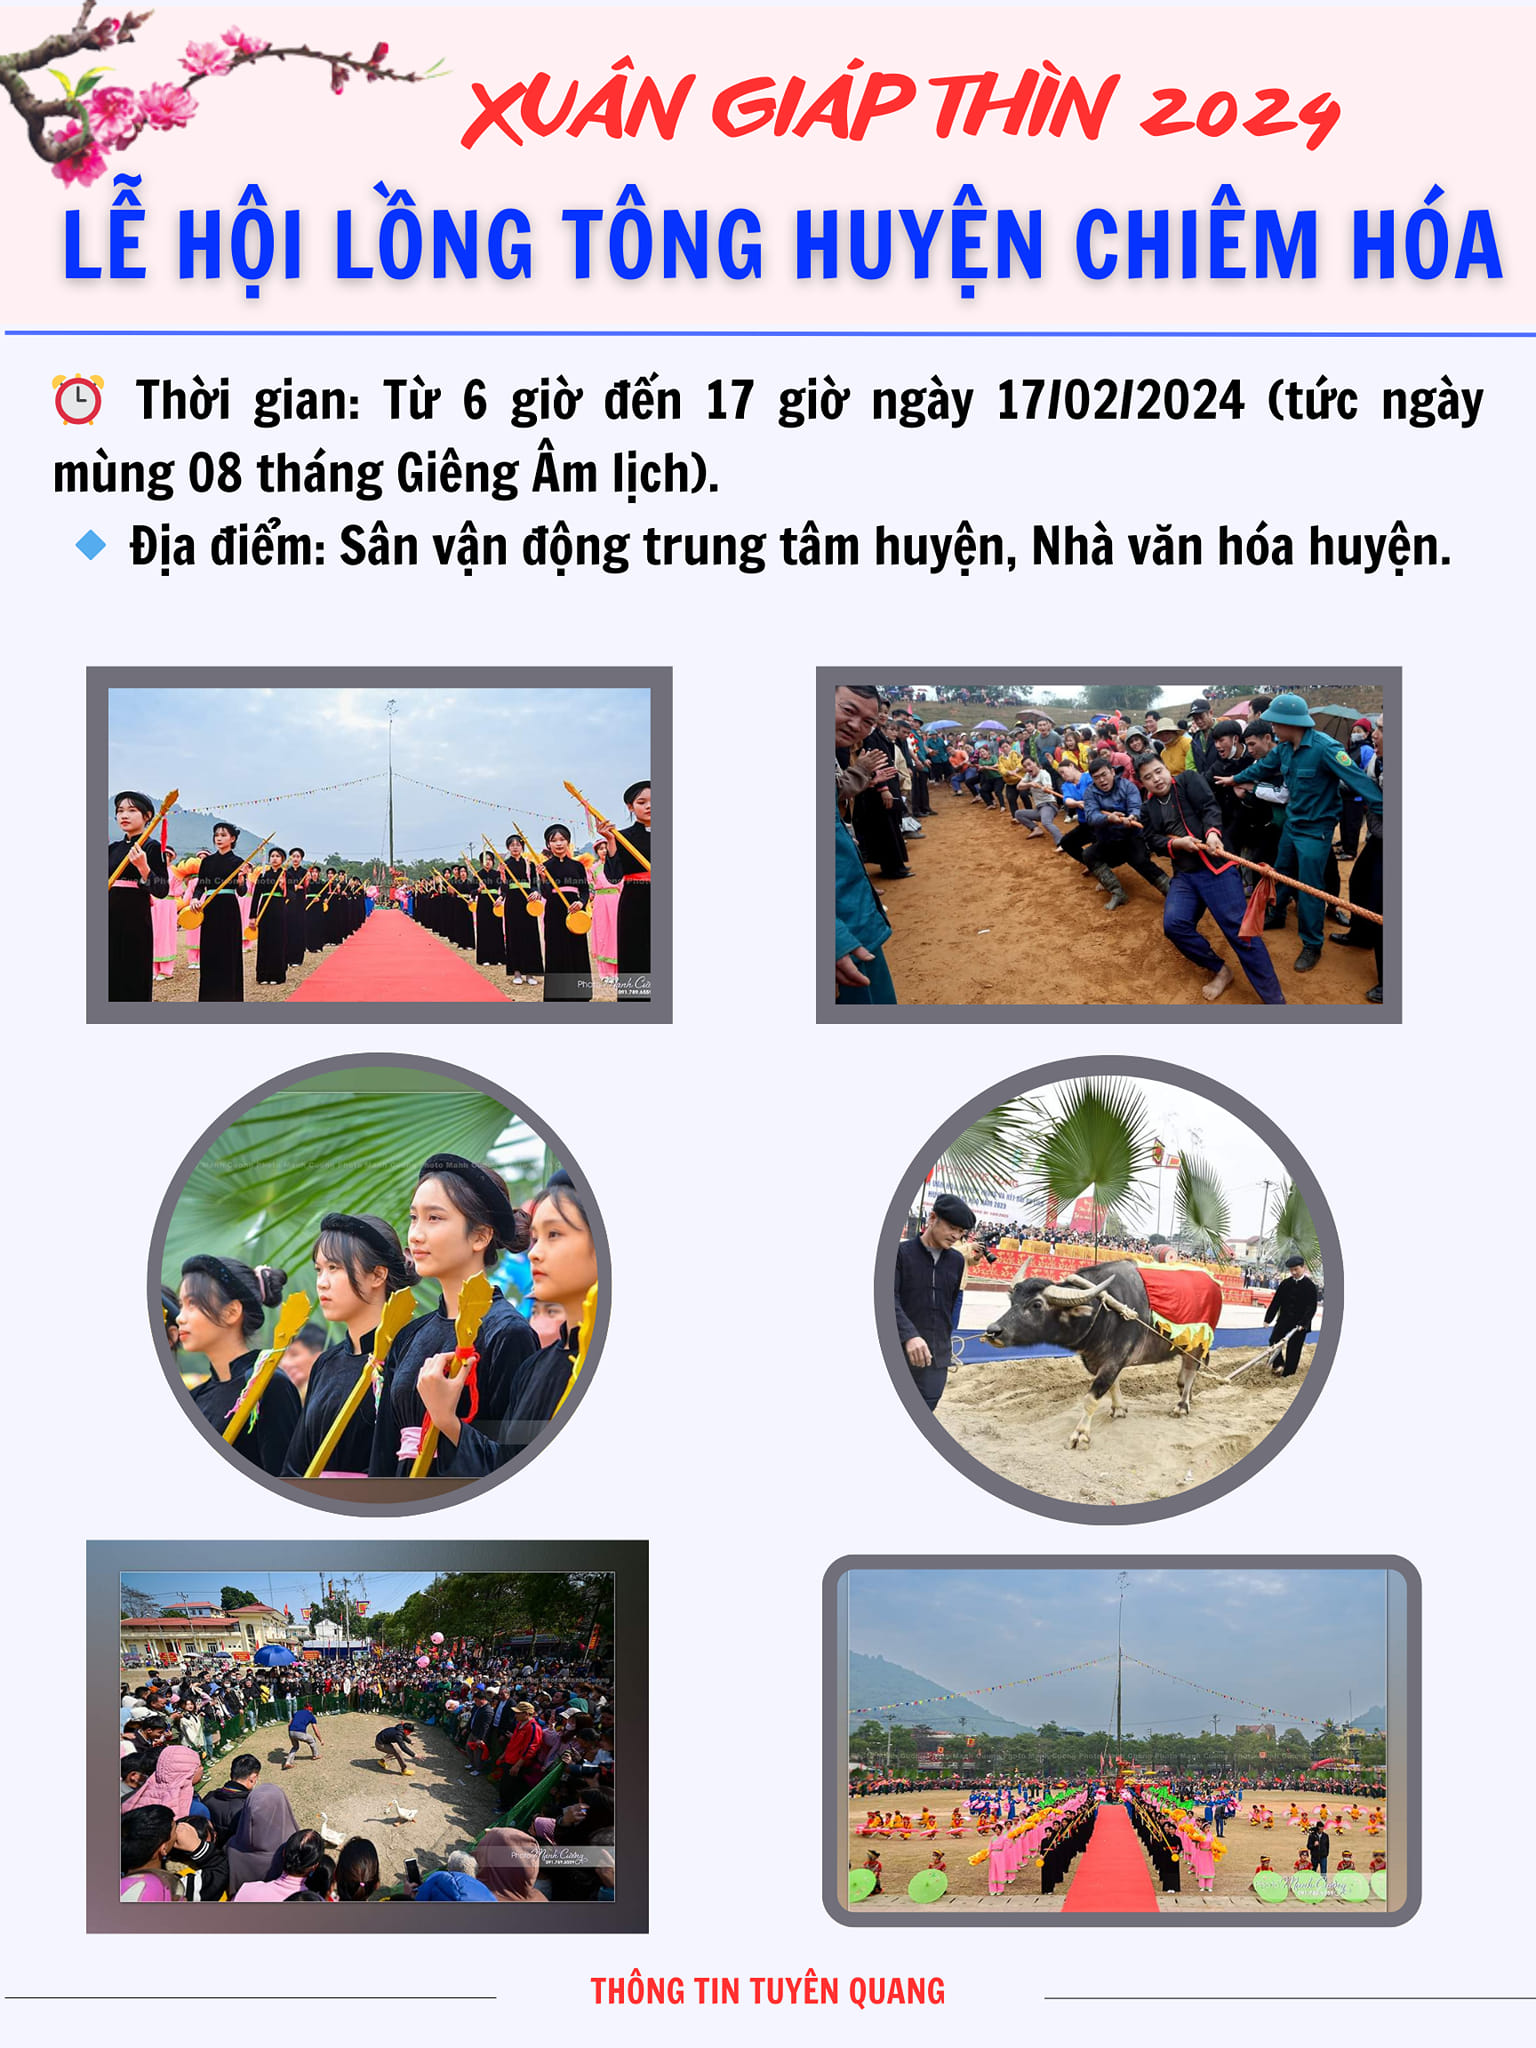 Long Tong Festival of Chiem Hoa district - Xuan Giap Thin 2024 with the theme "Preserving and promoting traditional culture associated with tourism development"